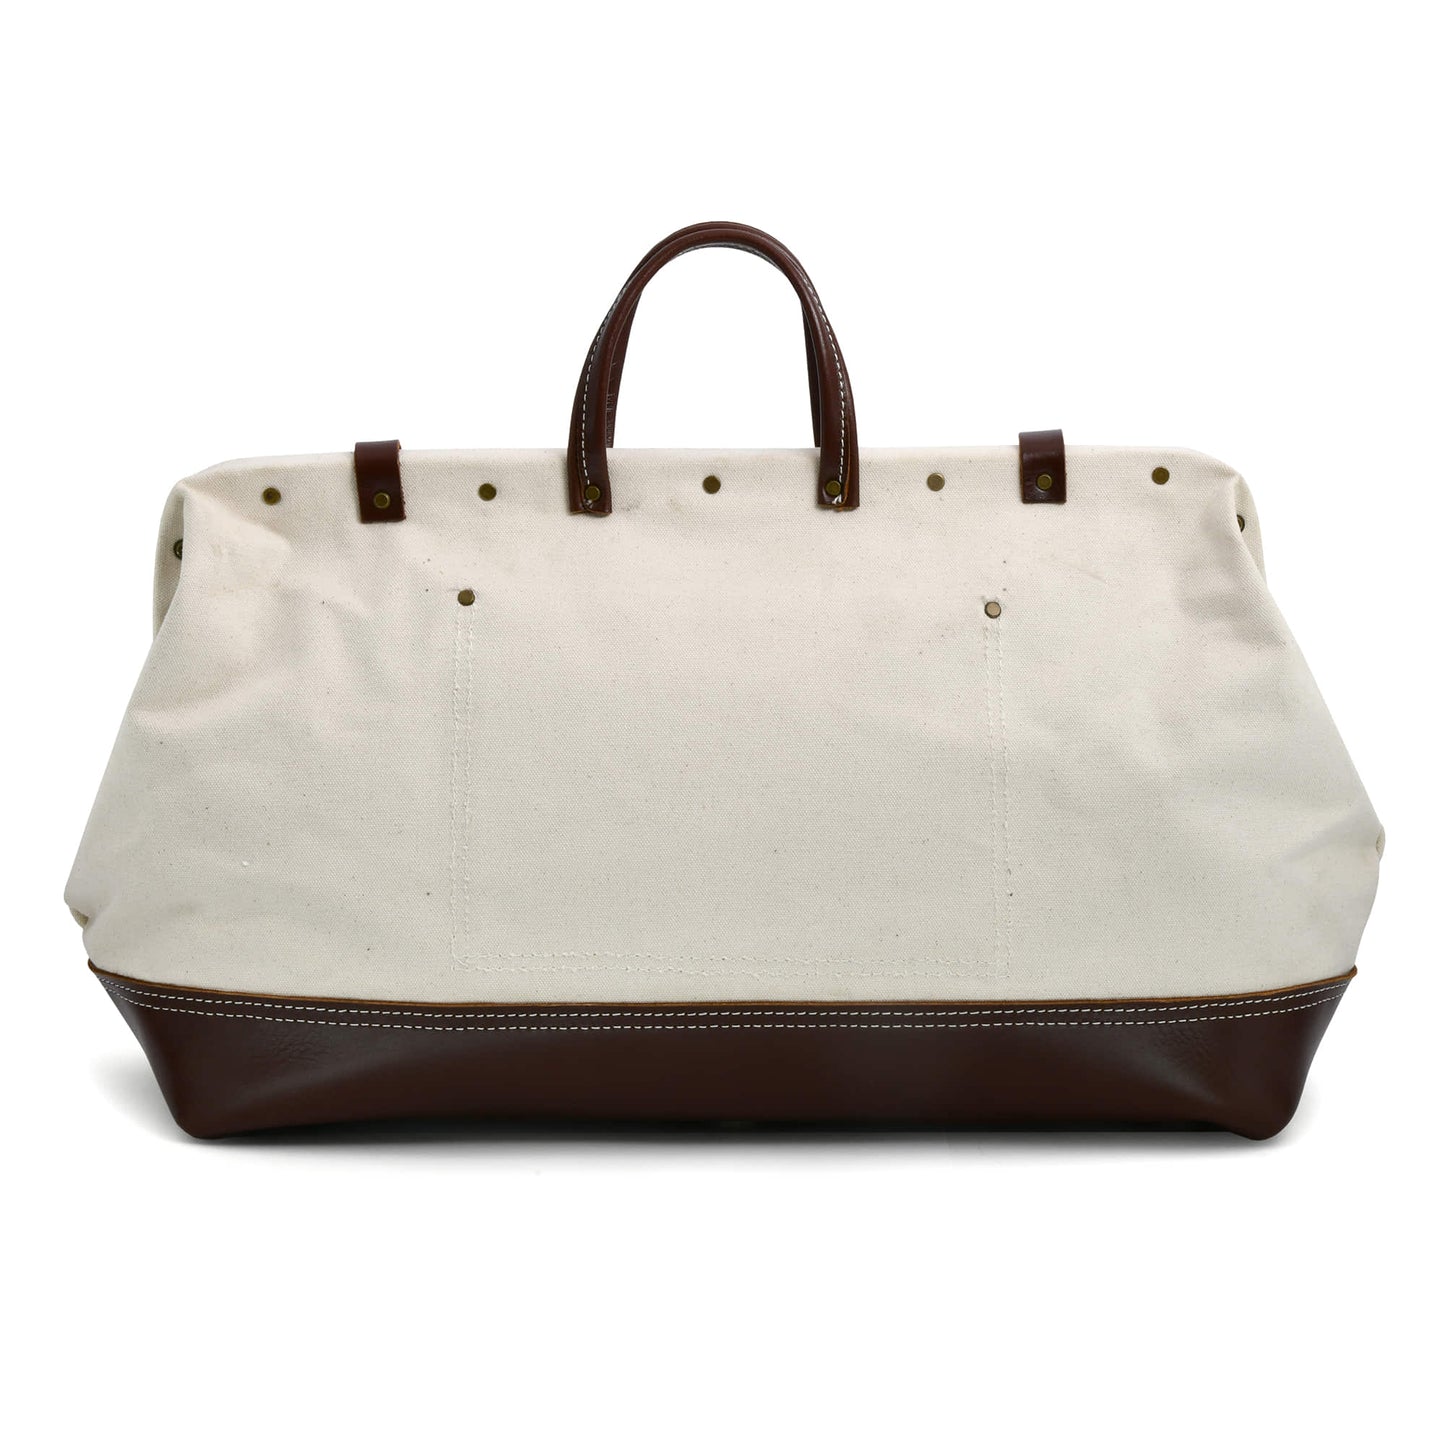 Style n Craft 97517 - 20 Inch Mason's Tool Bag in White Canvas and Dark Tan Full Grain Leather Combination - Back - Closed View